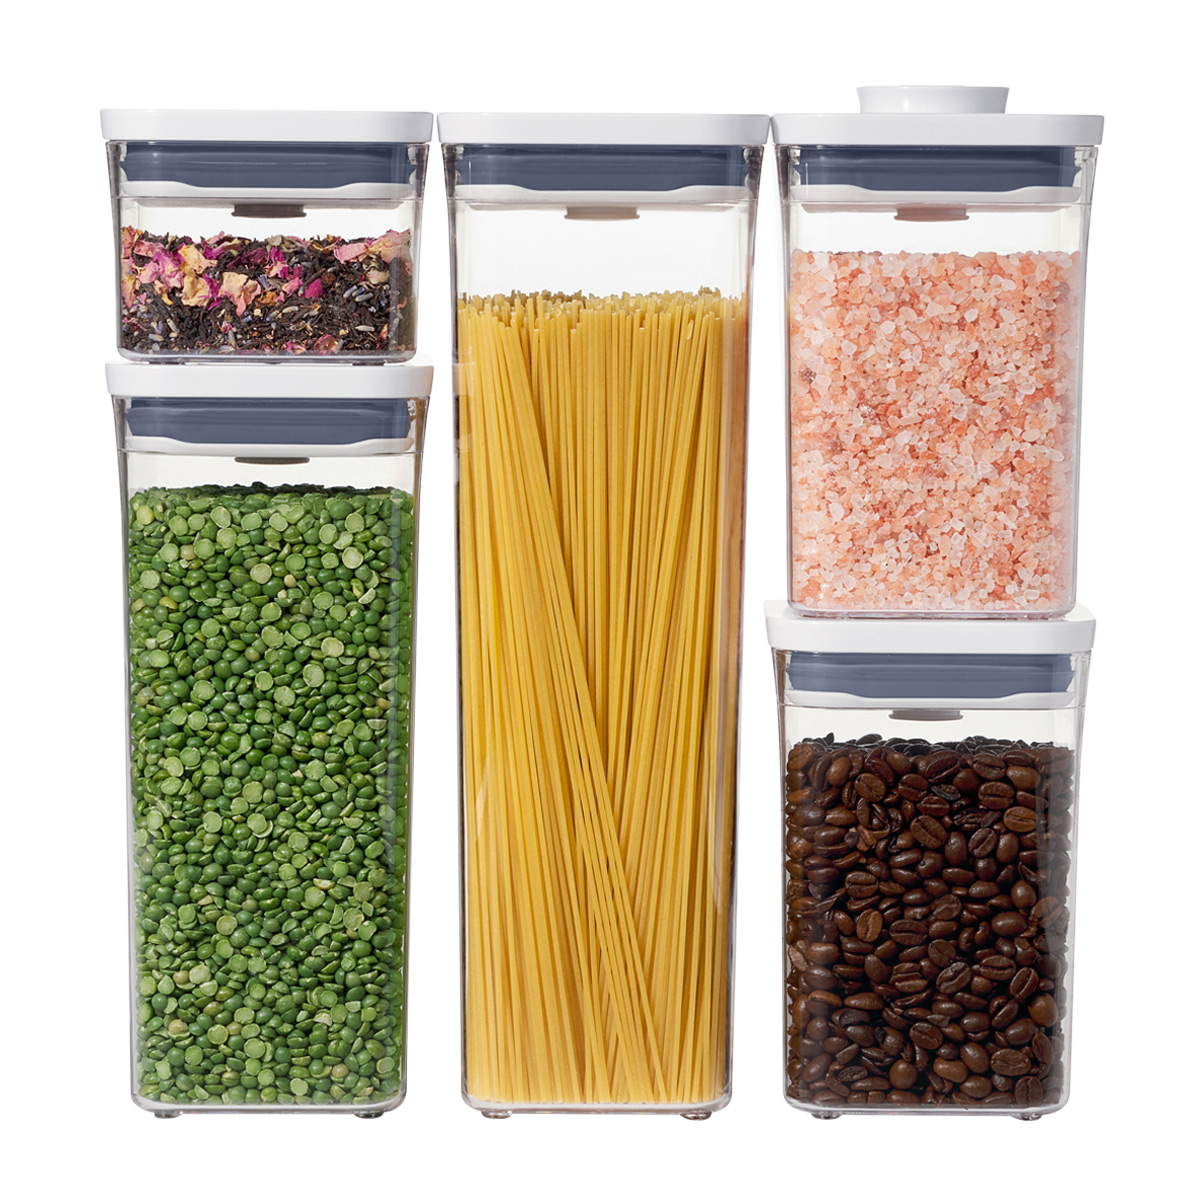 https://www.containerstore.com/catalogimages/369072/10075138-OXO-5-Piece-POP-Container-S.jpg